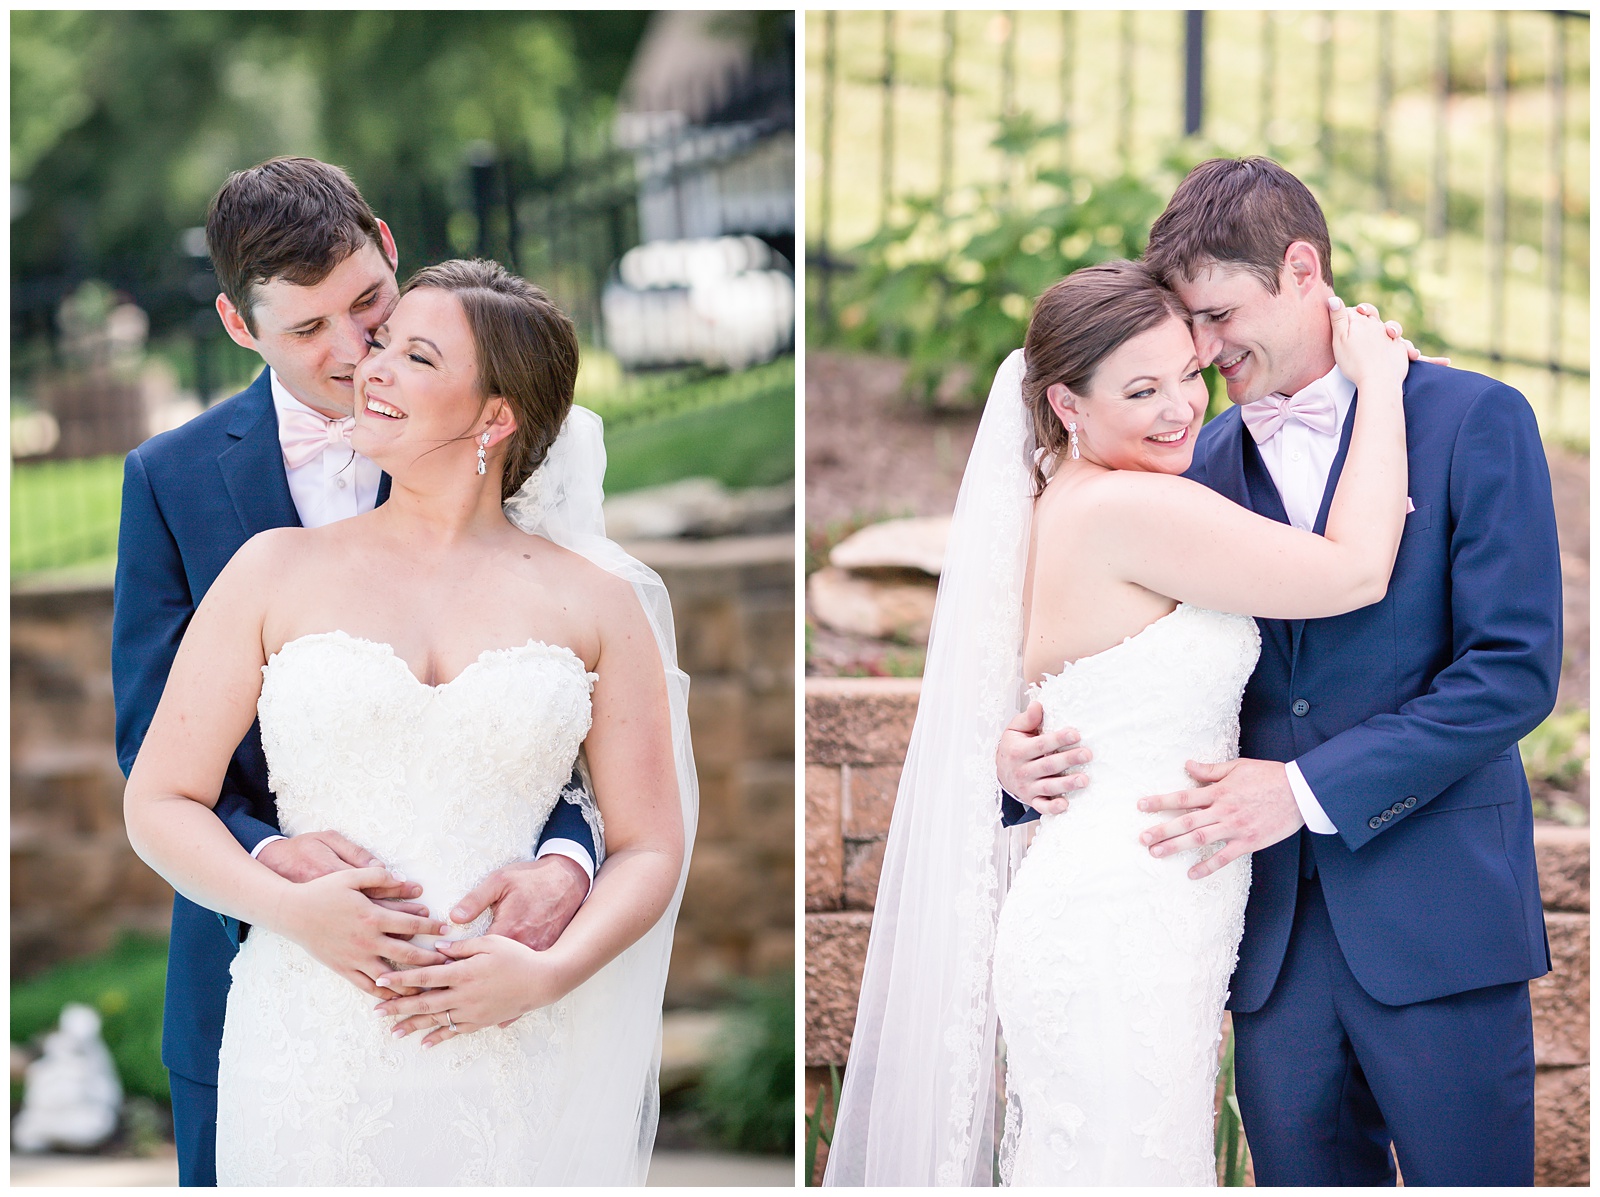 Wedding photography in Overland Park, Kansas, by Kansas City wedding photographers Wisdom-Watson Weddings.